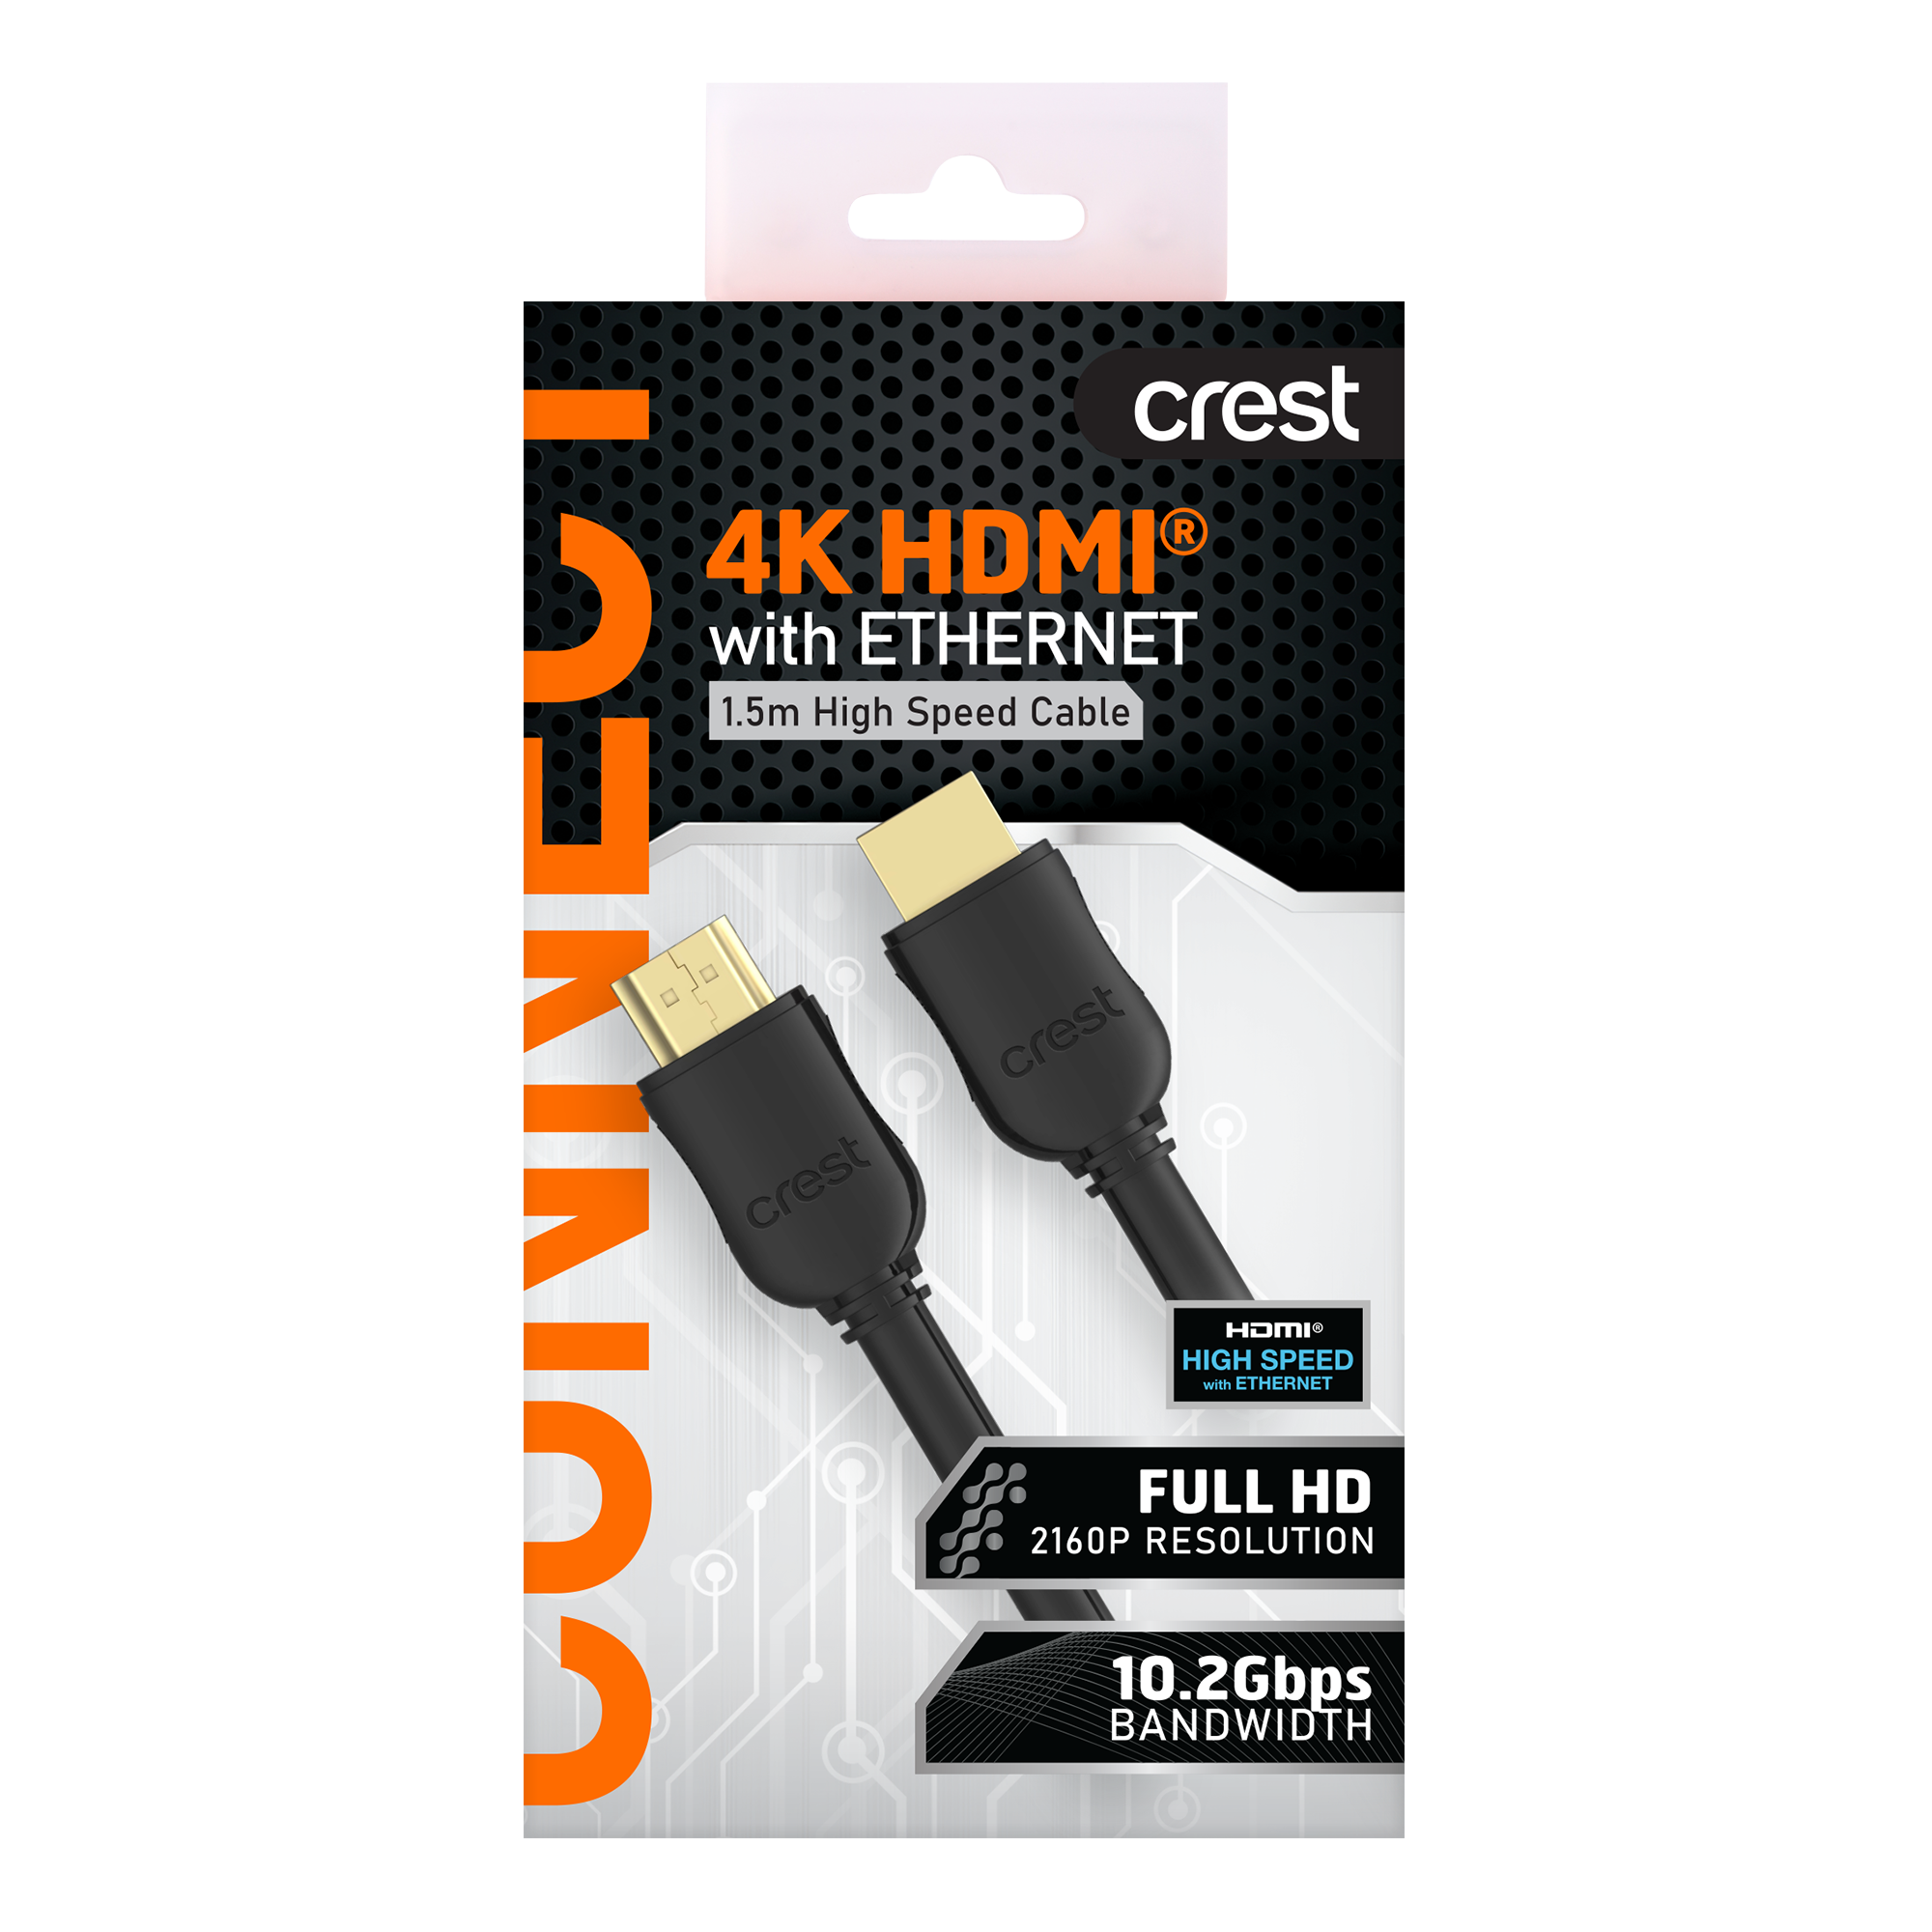 4K HDMI With Ethernet Cable 1.5M